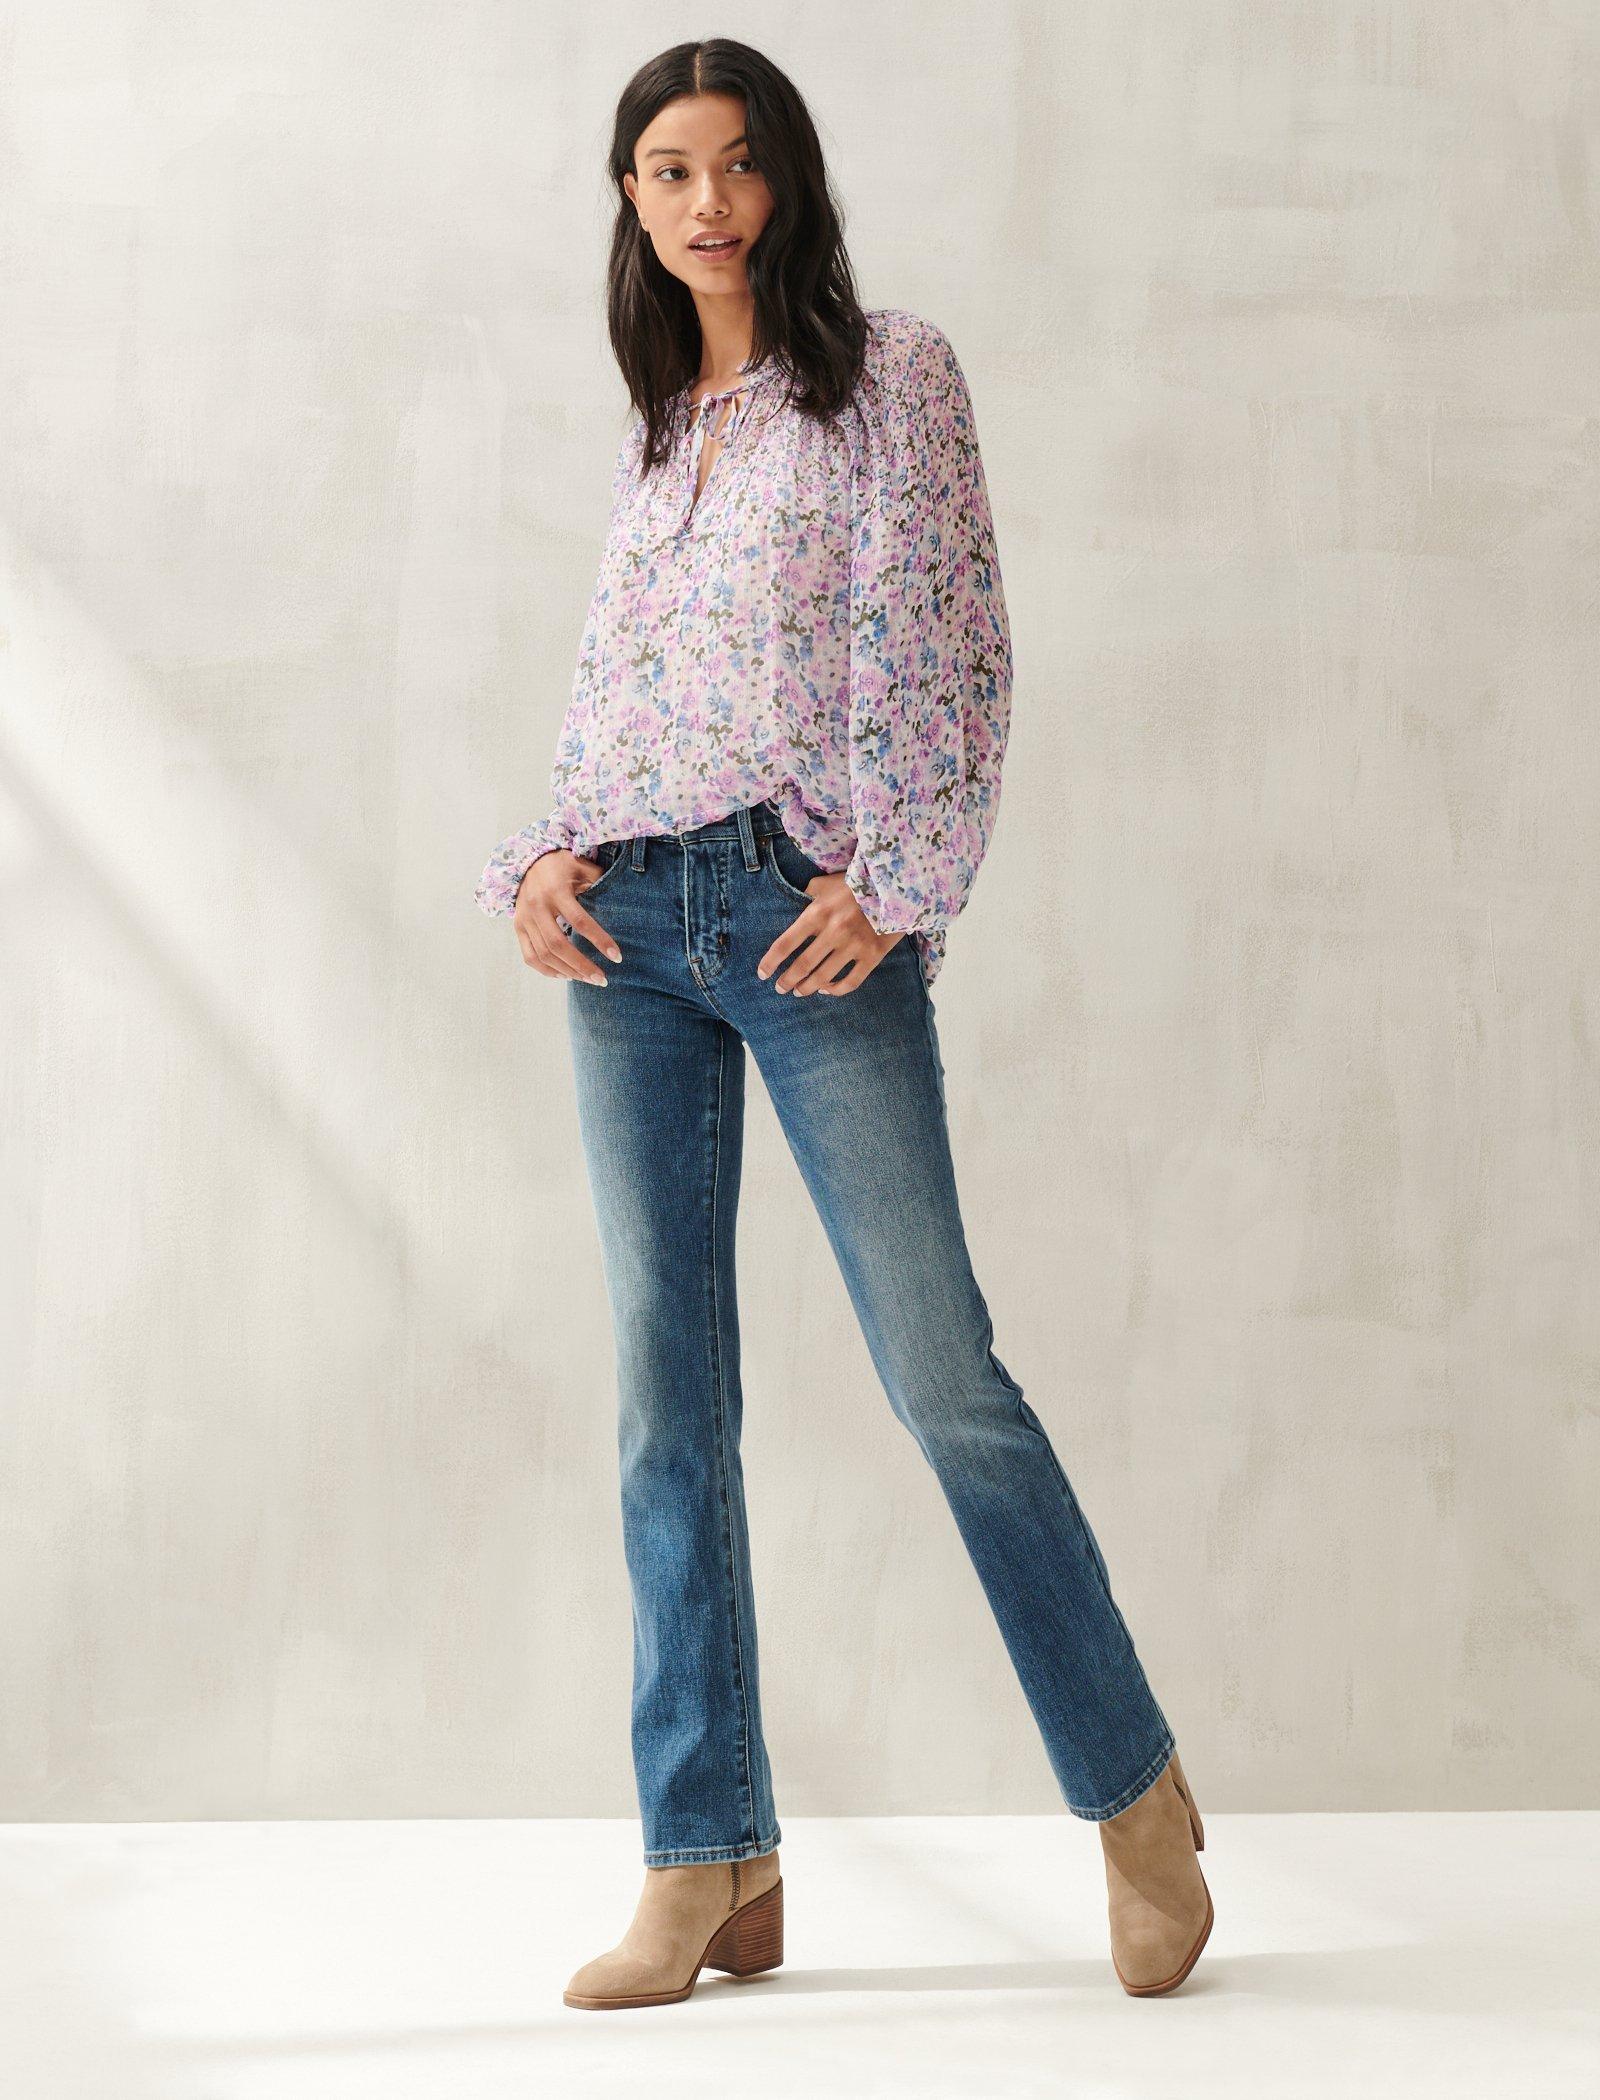 lucky brand jeans colors